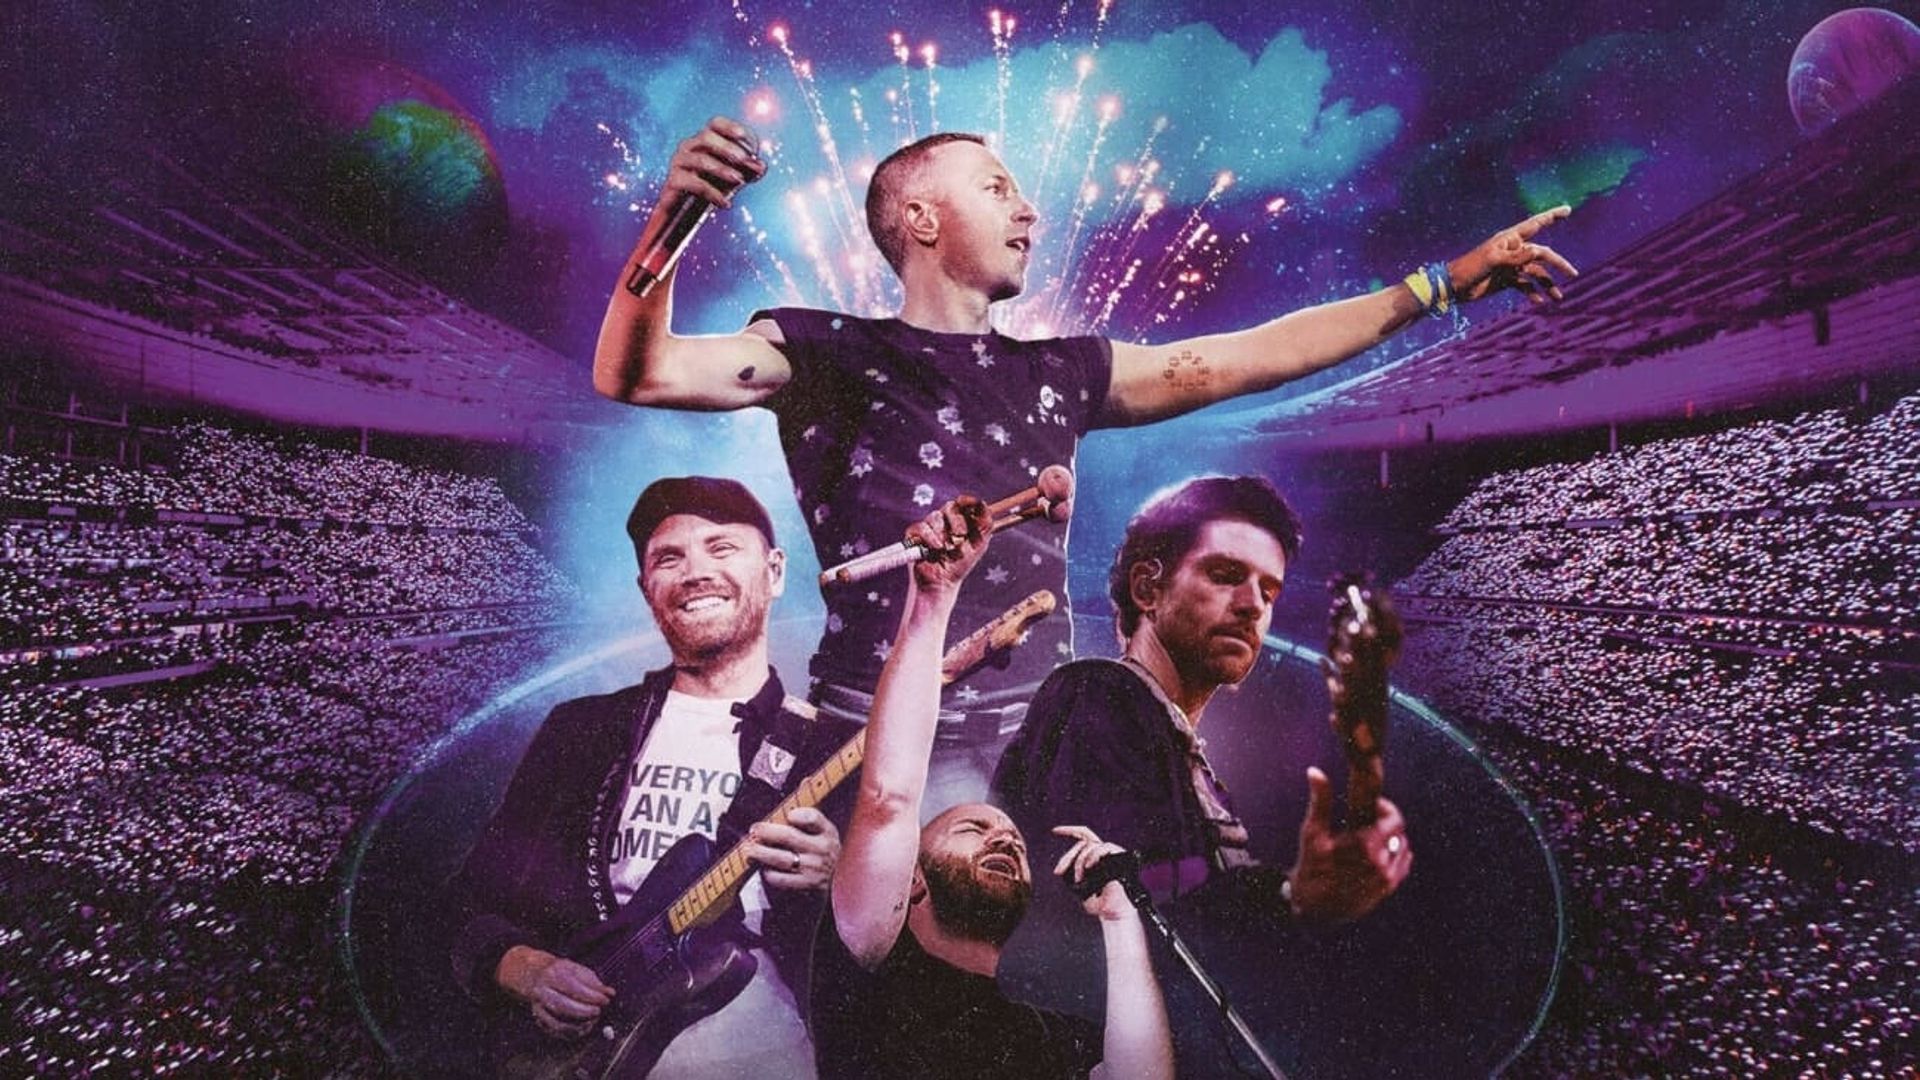 Coldplay: Music of the Spheres - Live at River Plate background